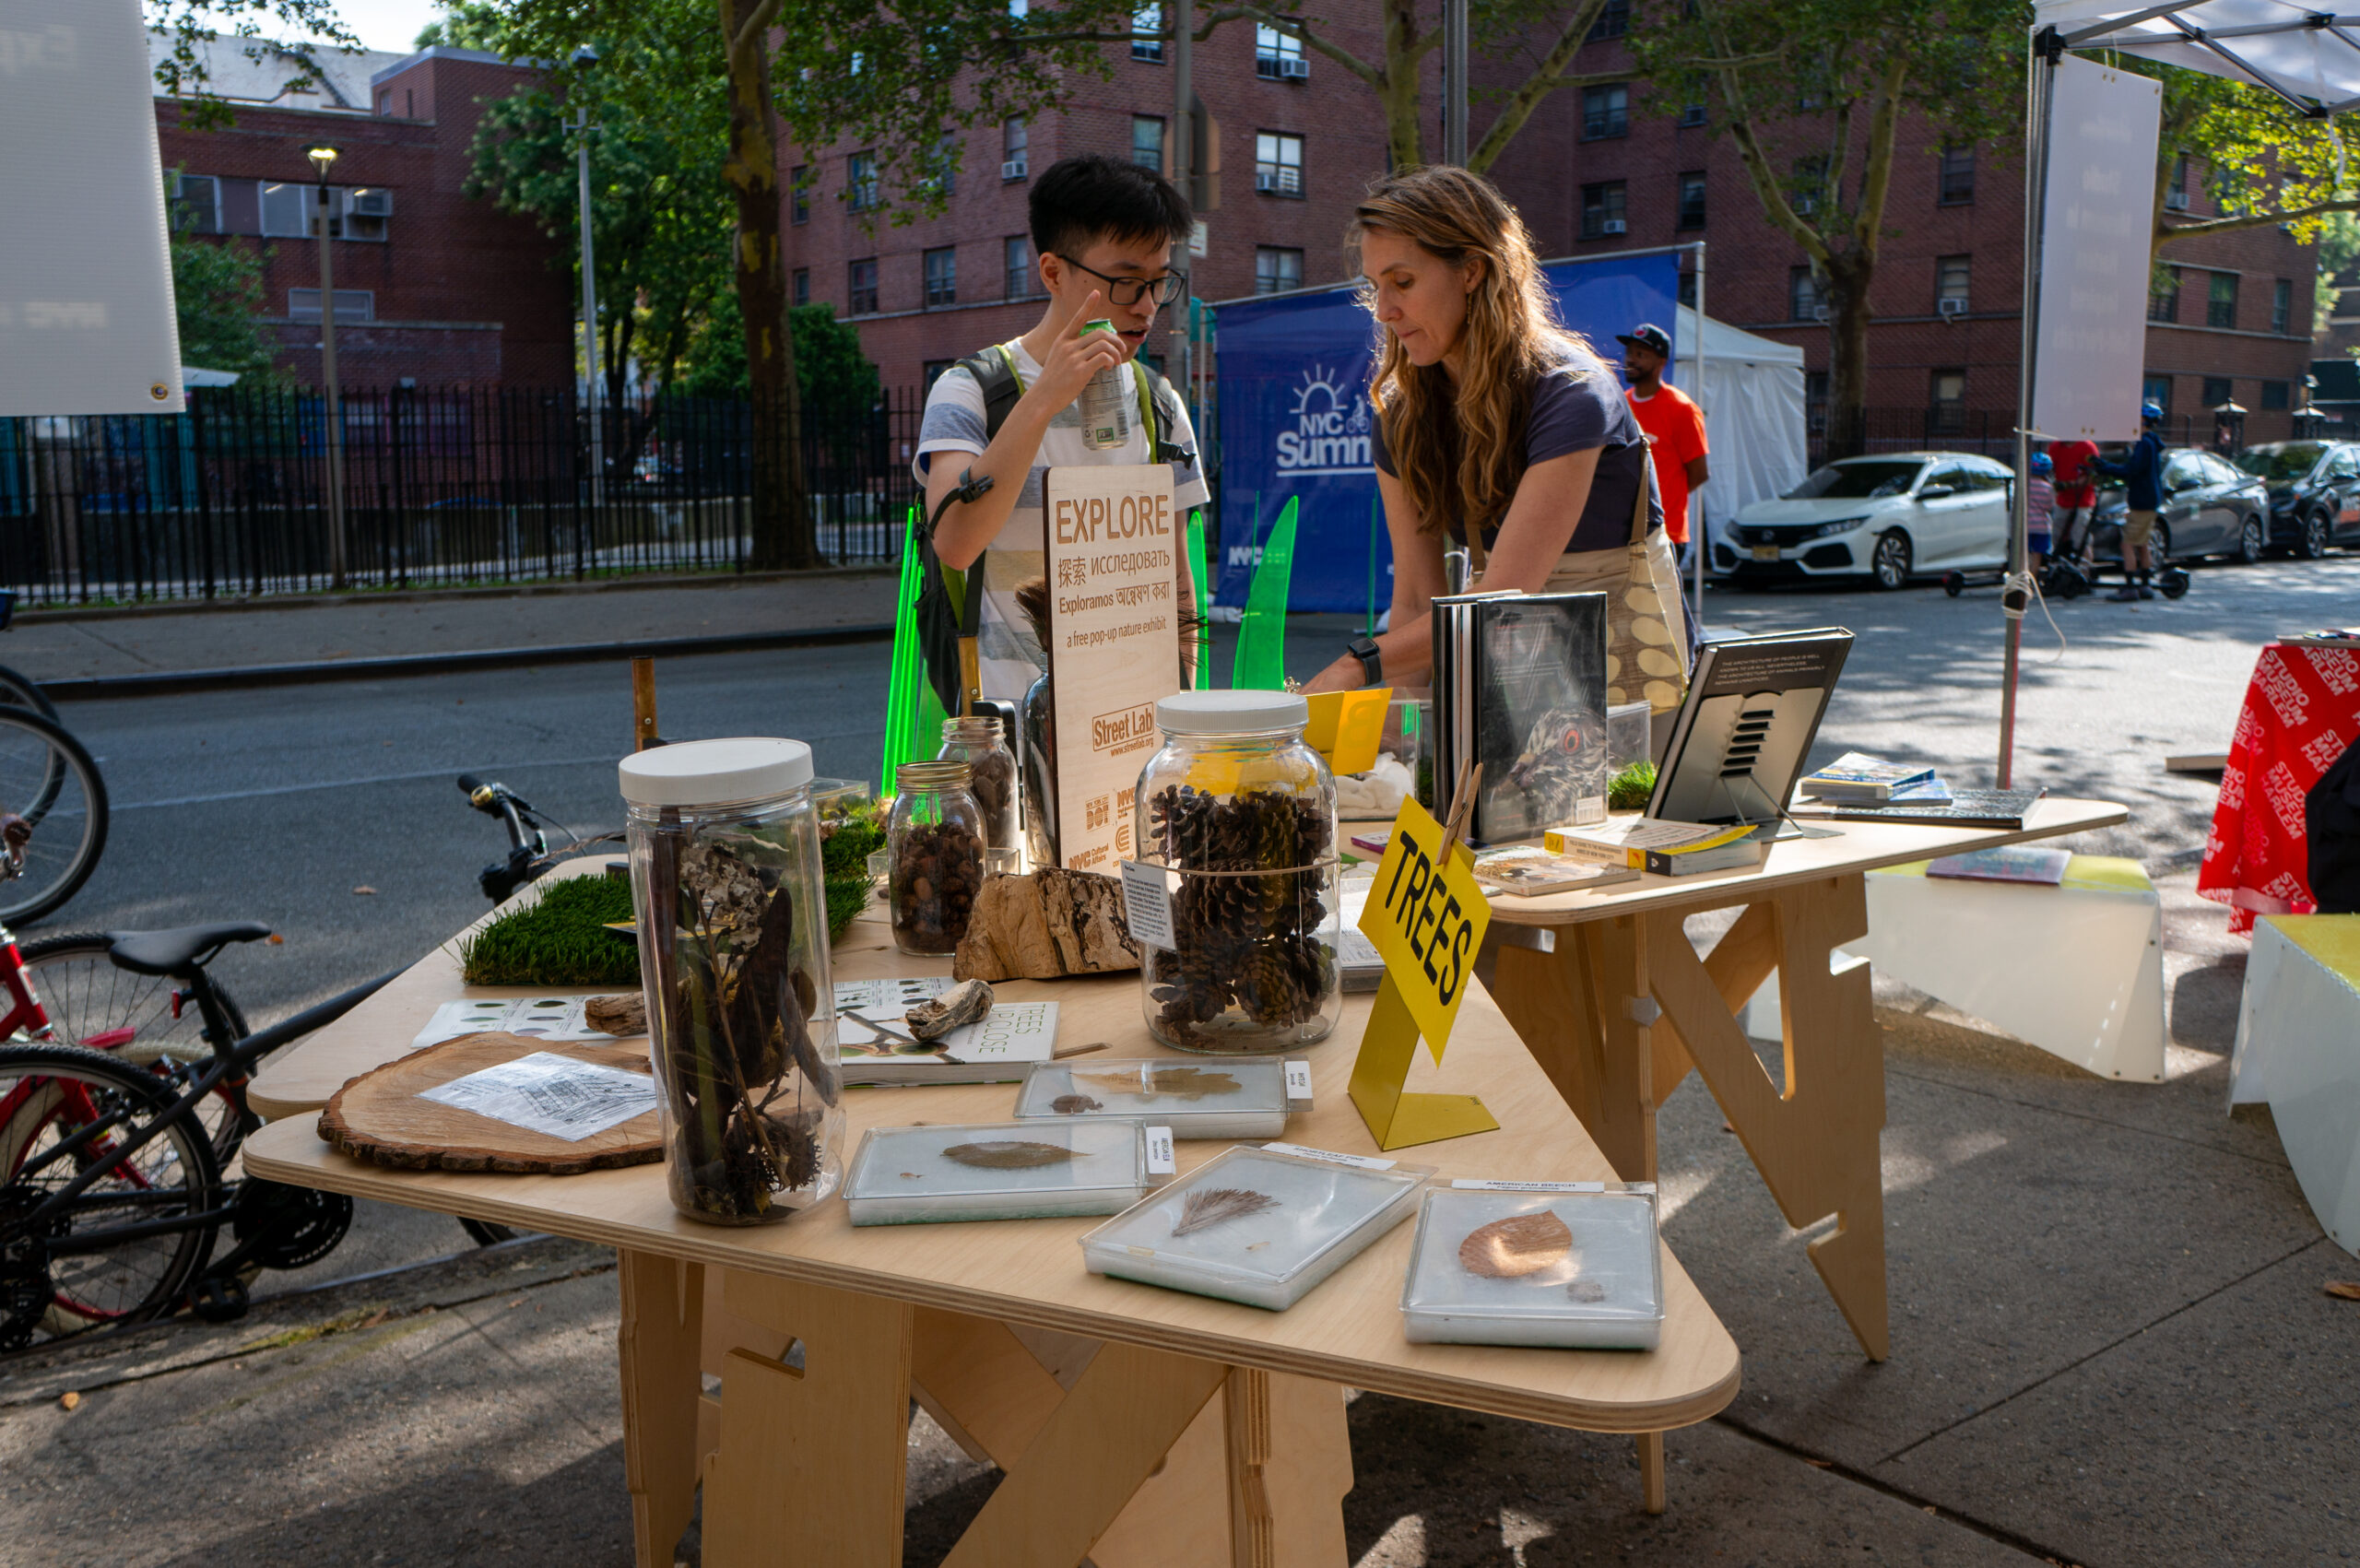 A view of two people looking at different bird specimen on a table in the street.